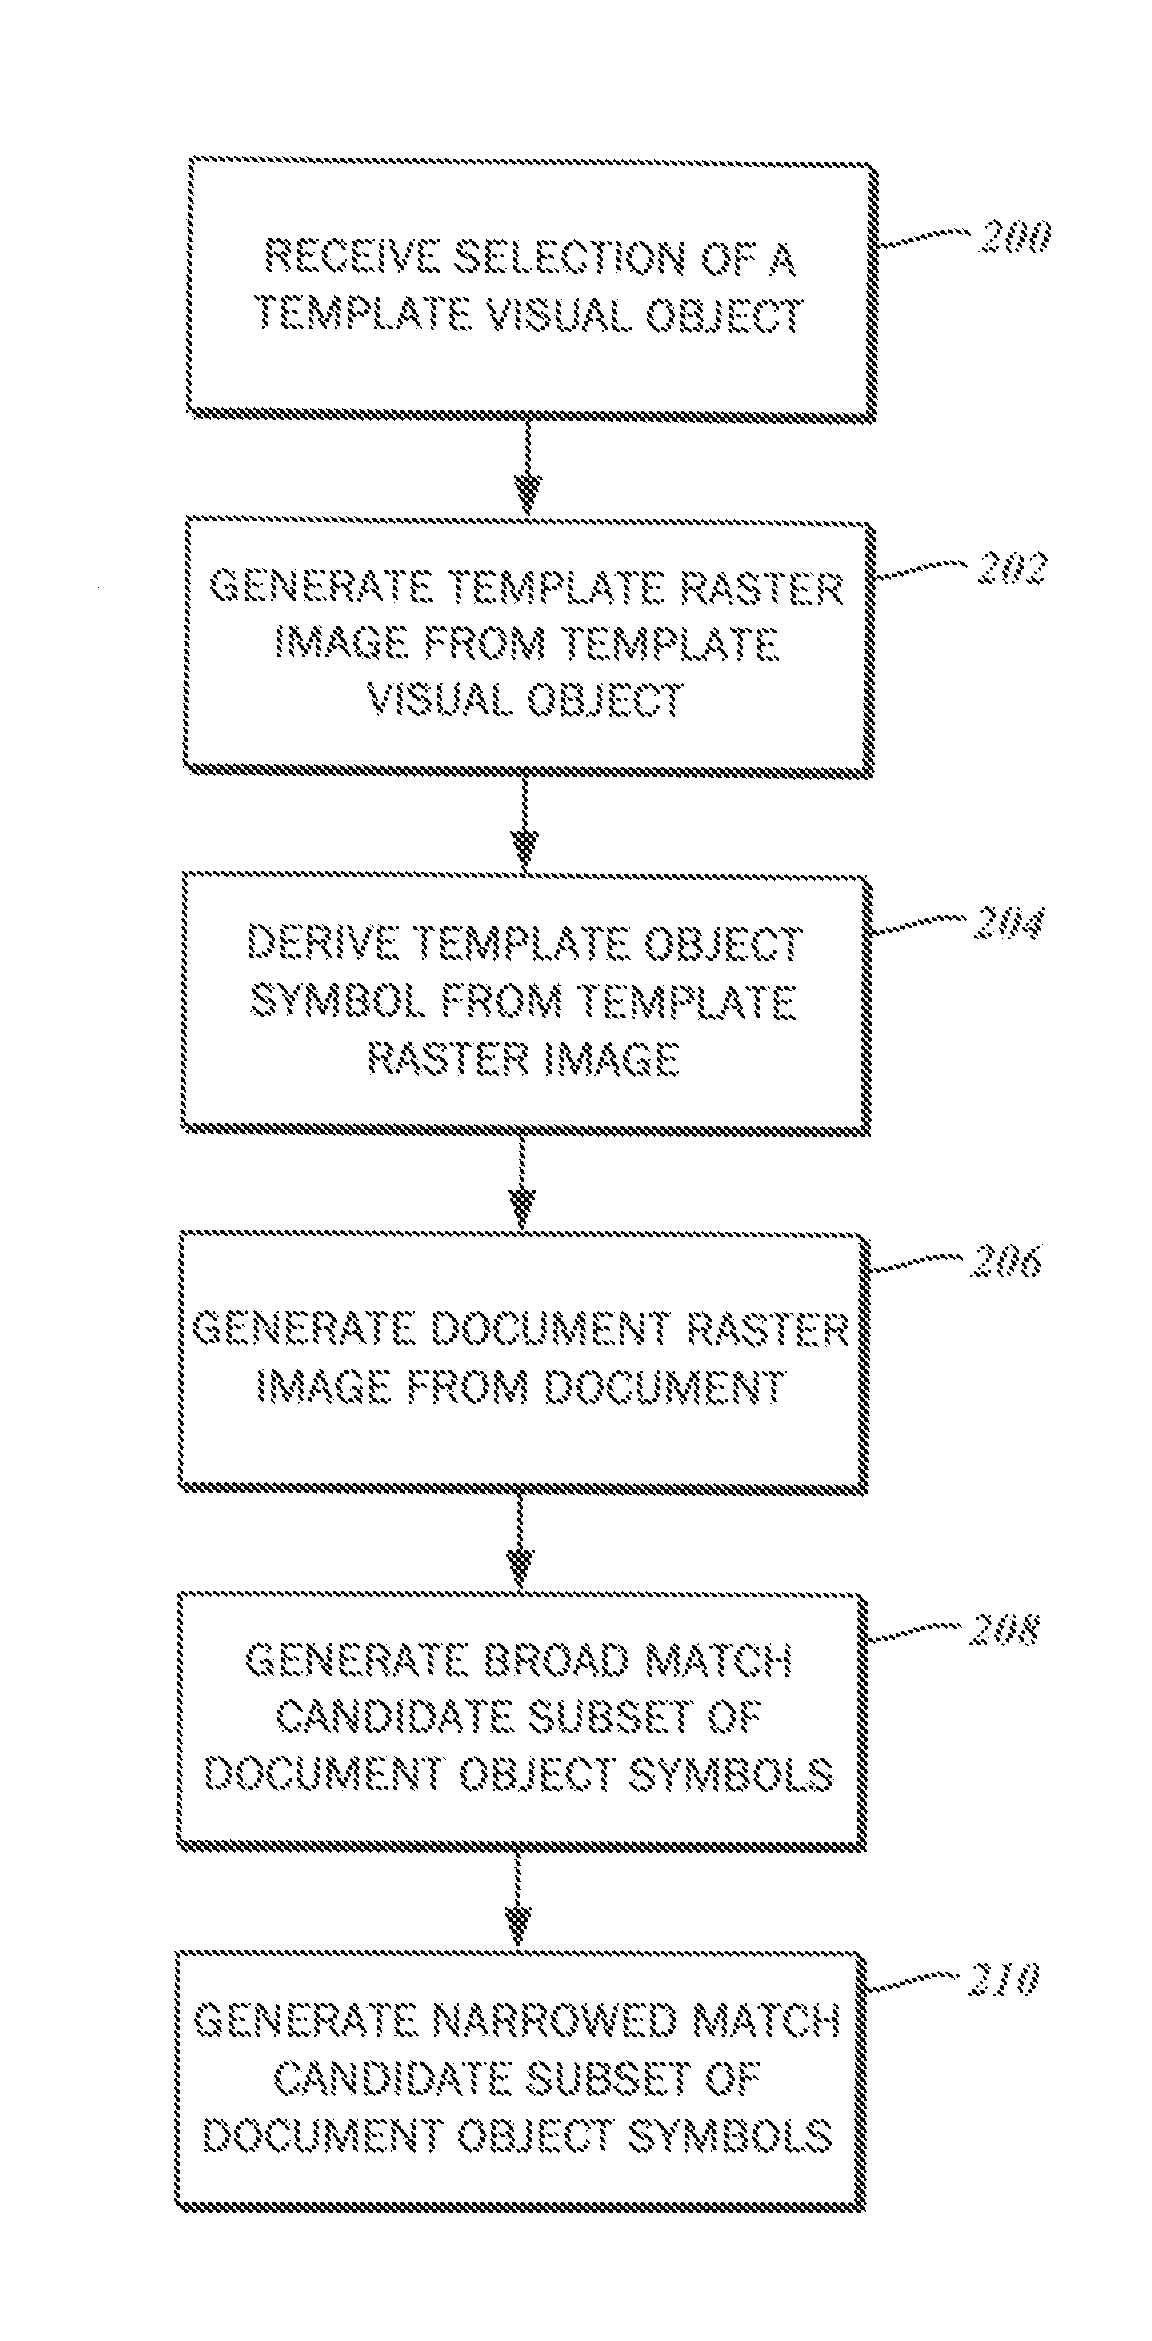 Method for multiple pass symbol and components-based visual object searching of documents